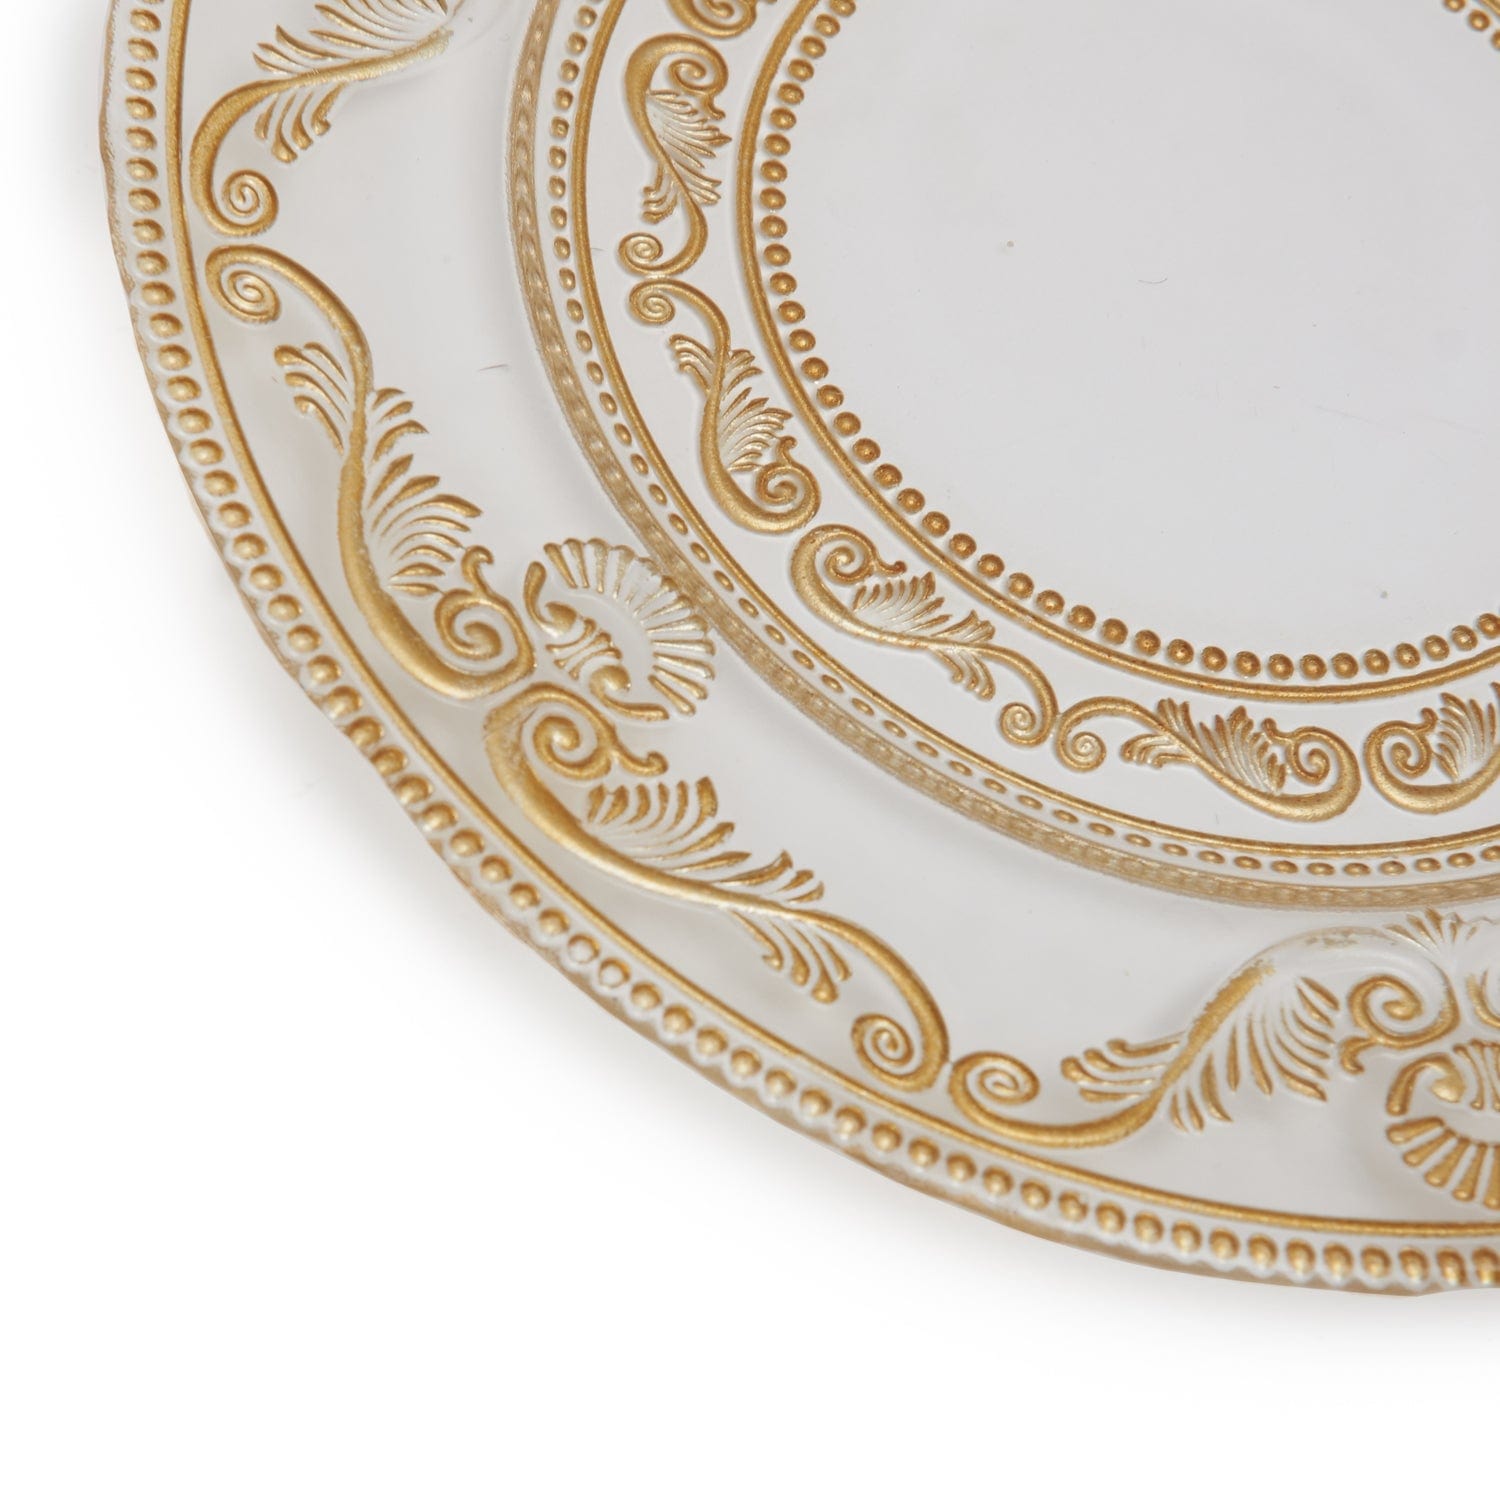 Glass Charger Plate Clear With Gold Burshing - 1Q1935-832